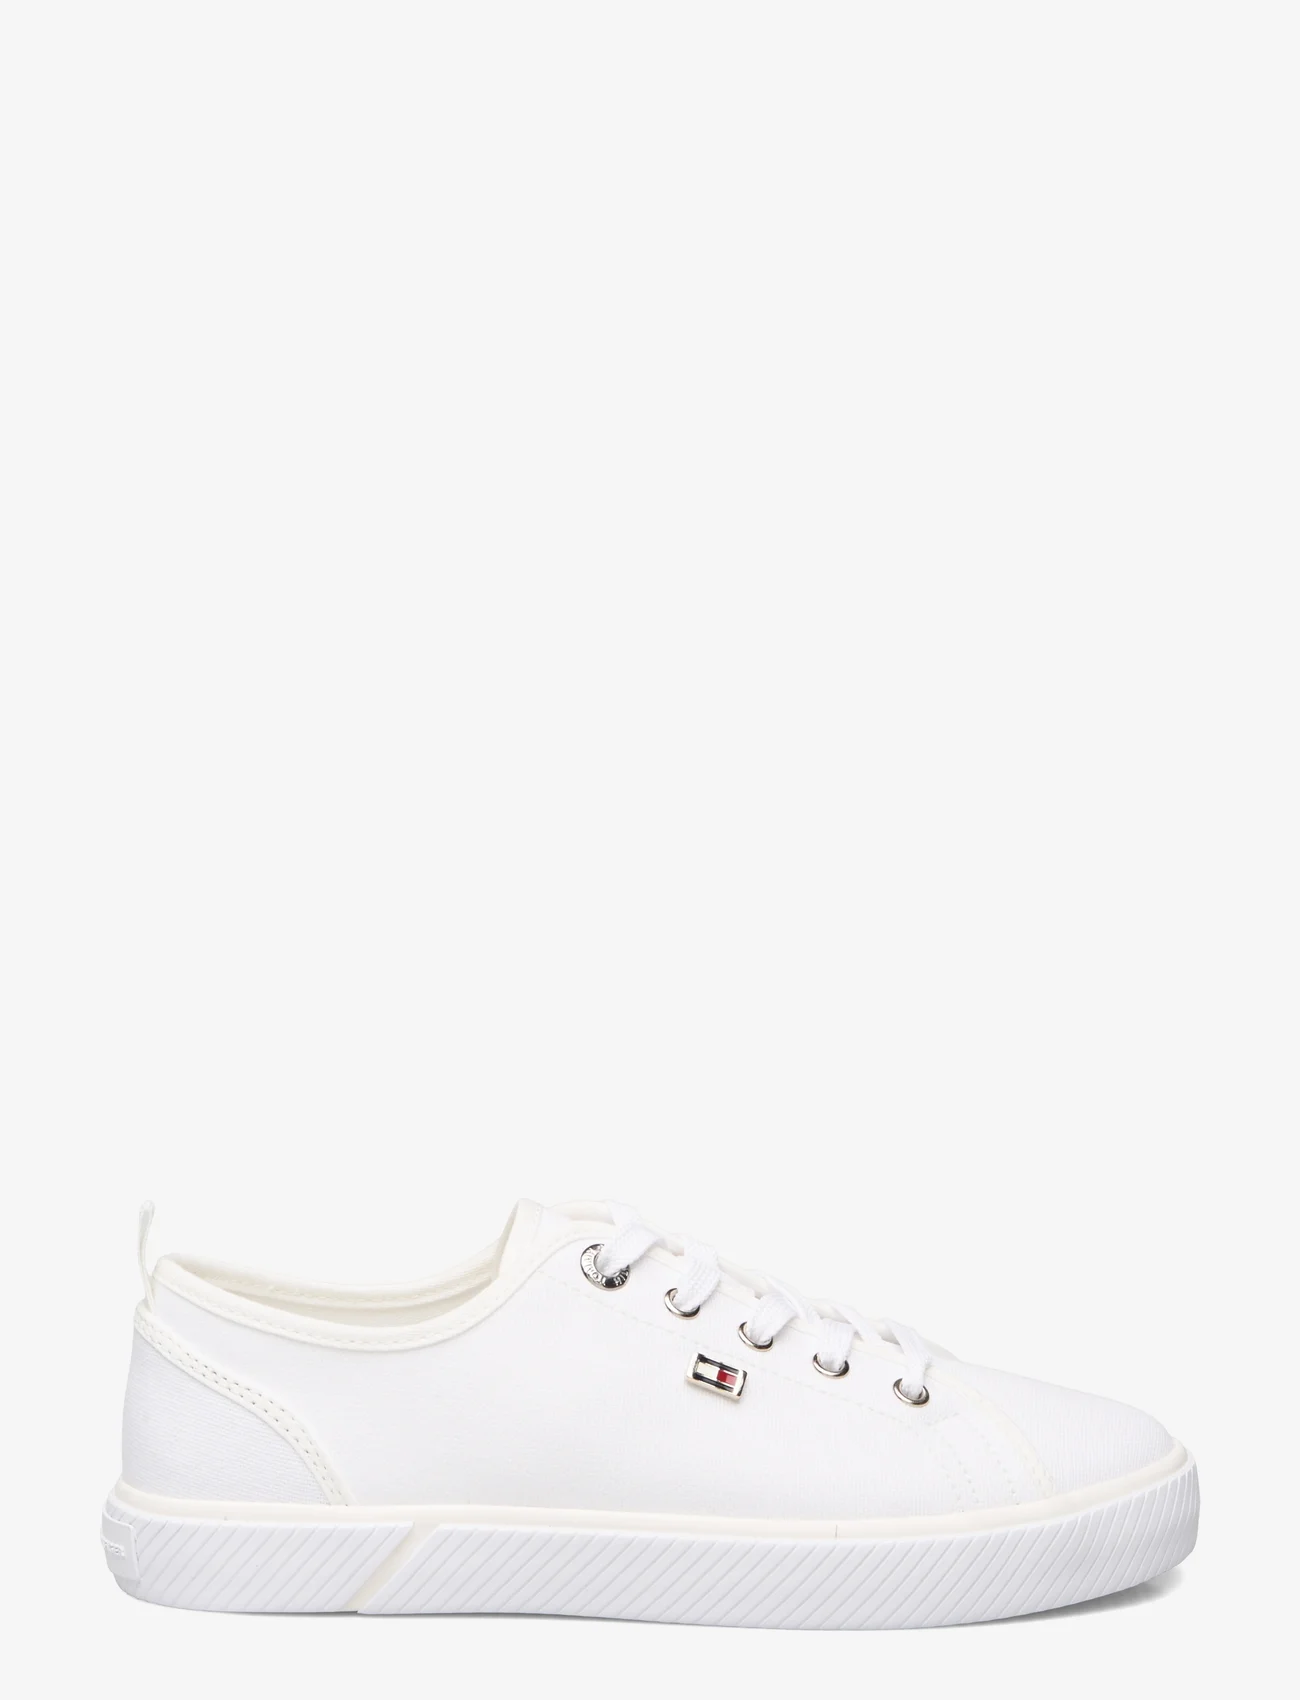 Tommy Hilfiger - VULC CANVAS SNEAKER - sneakers - white - 1